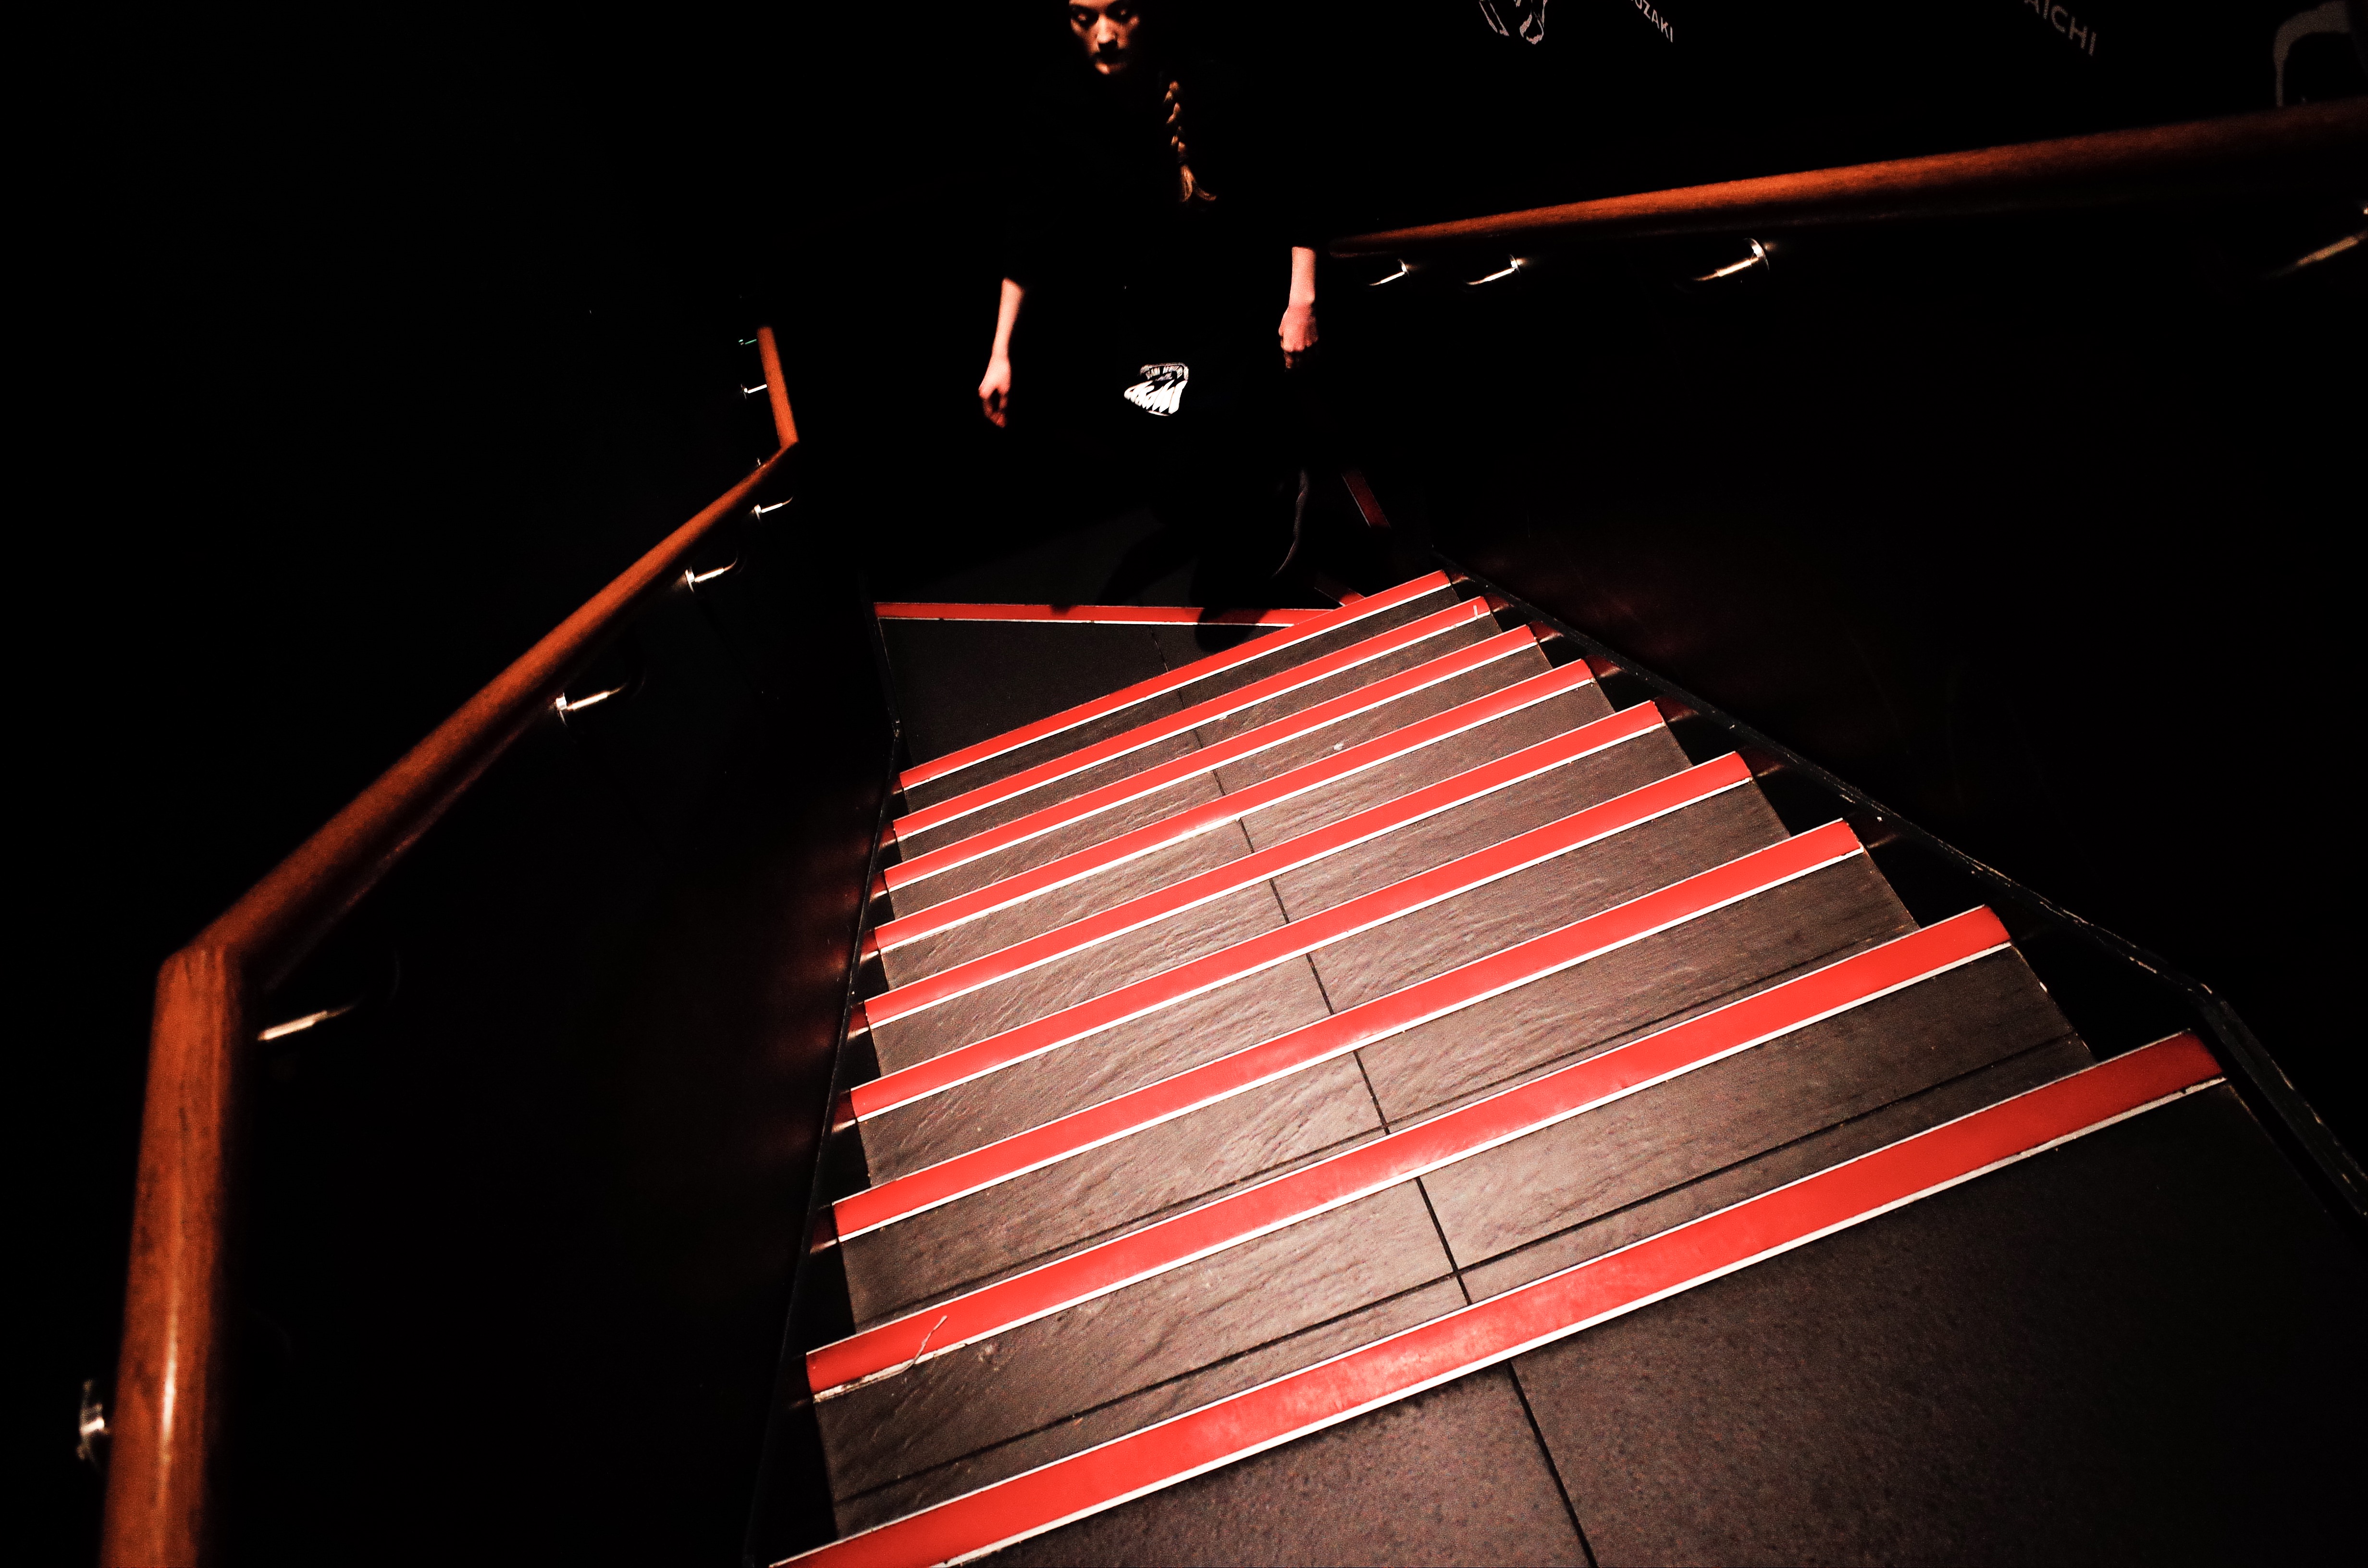 London, leading lines, red, composition